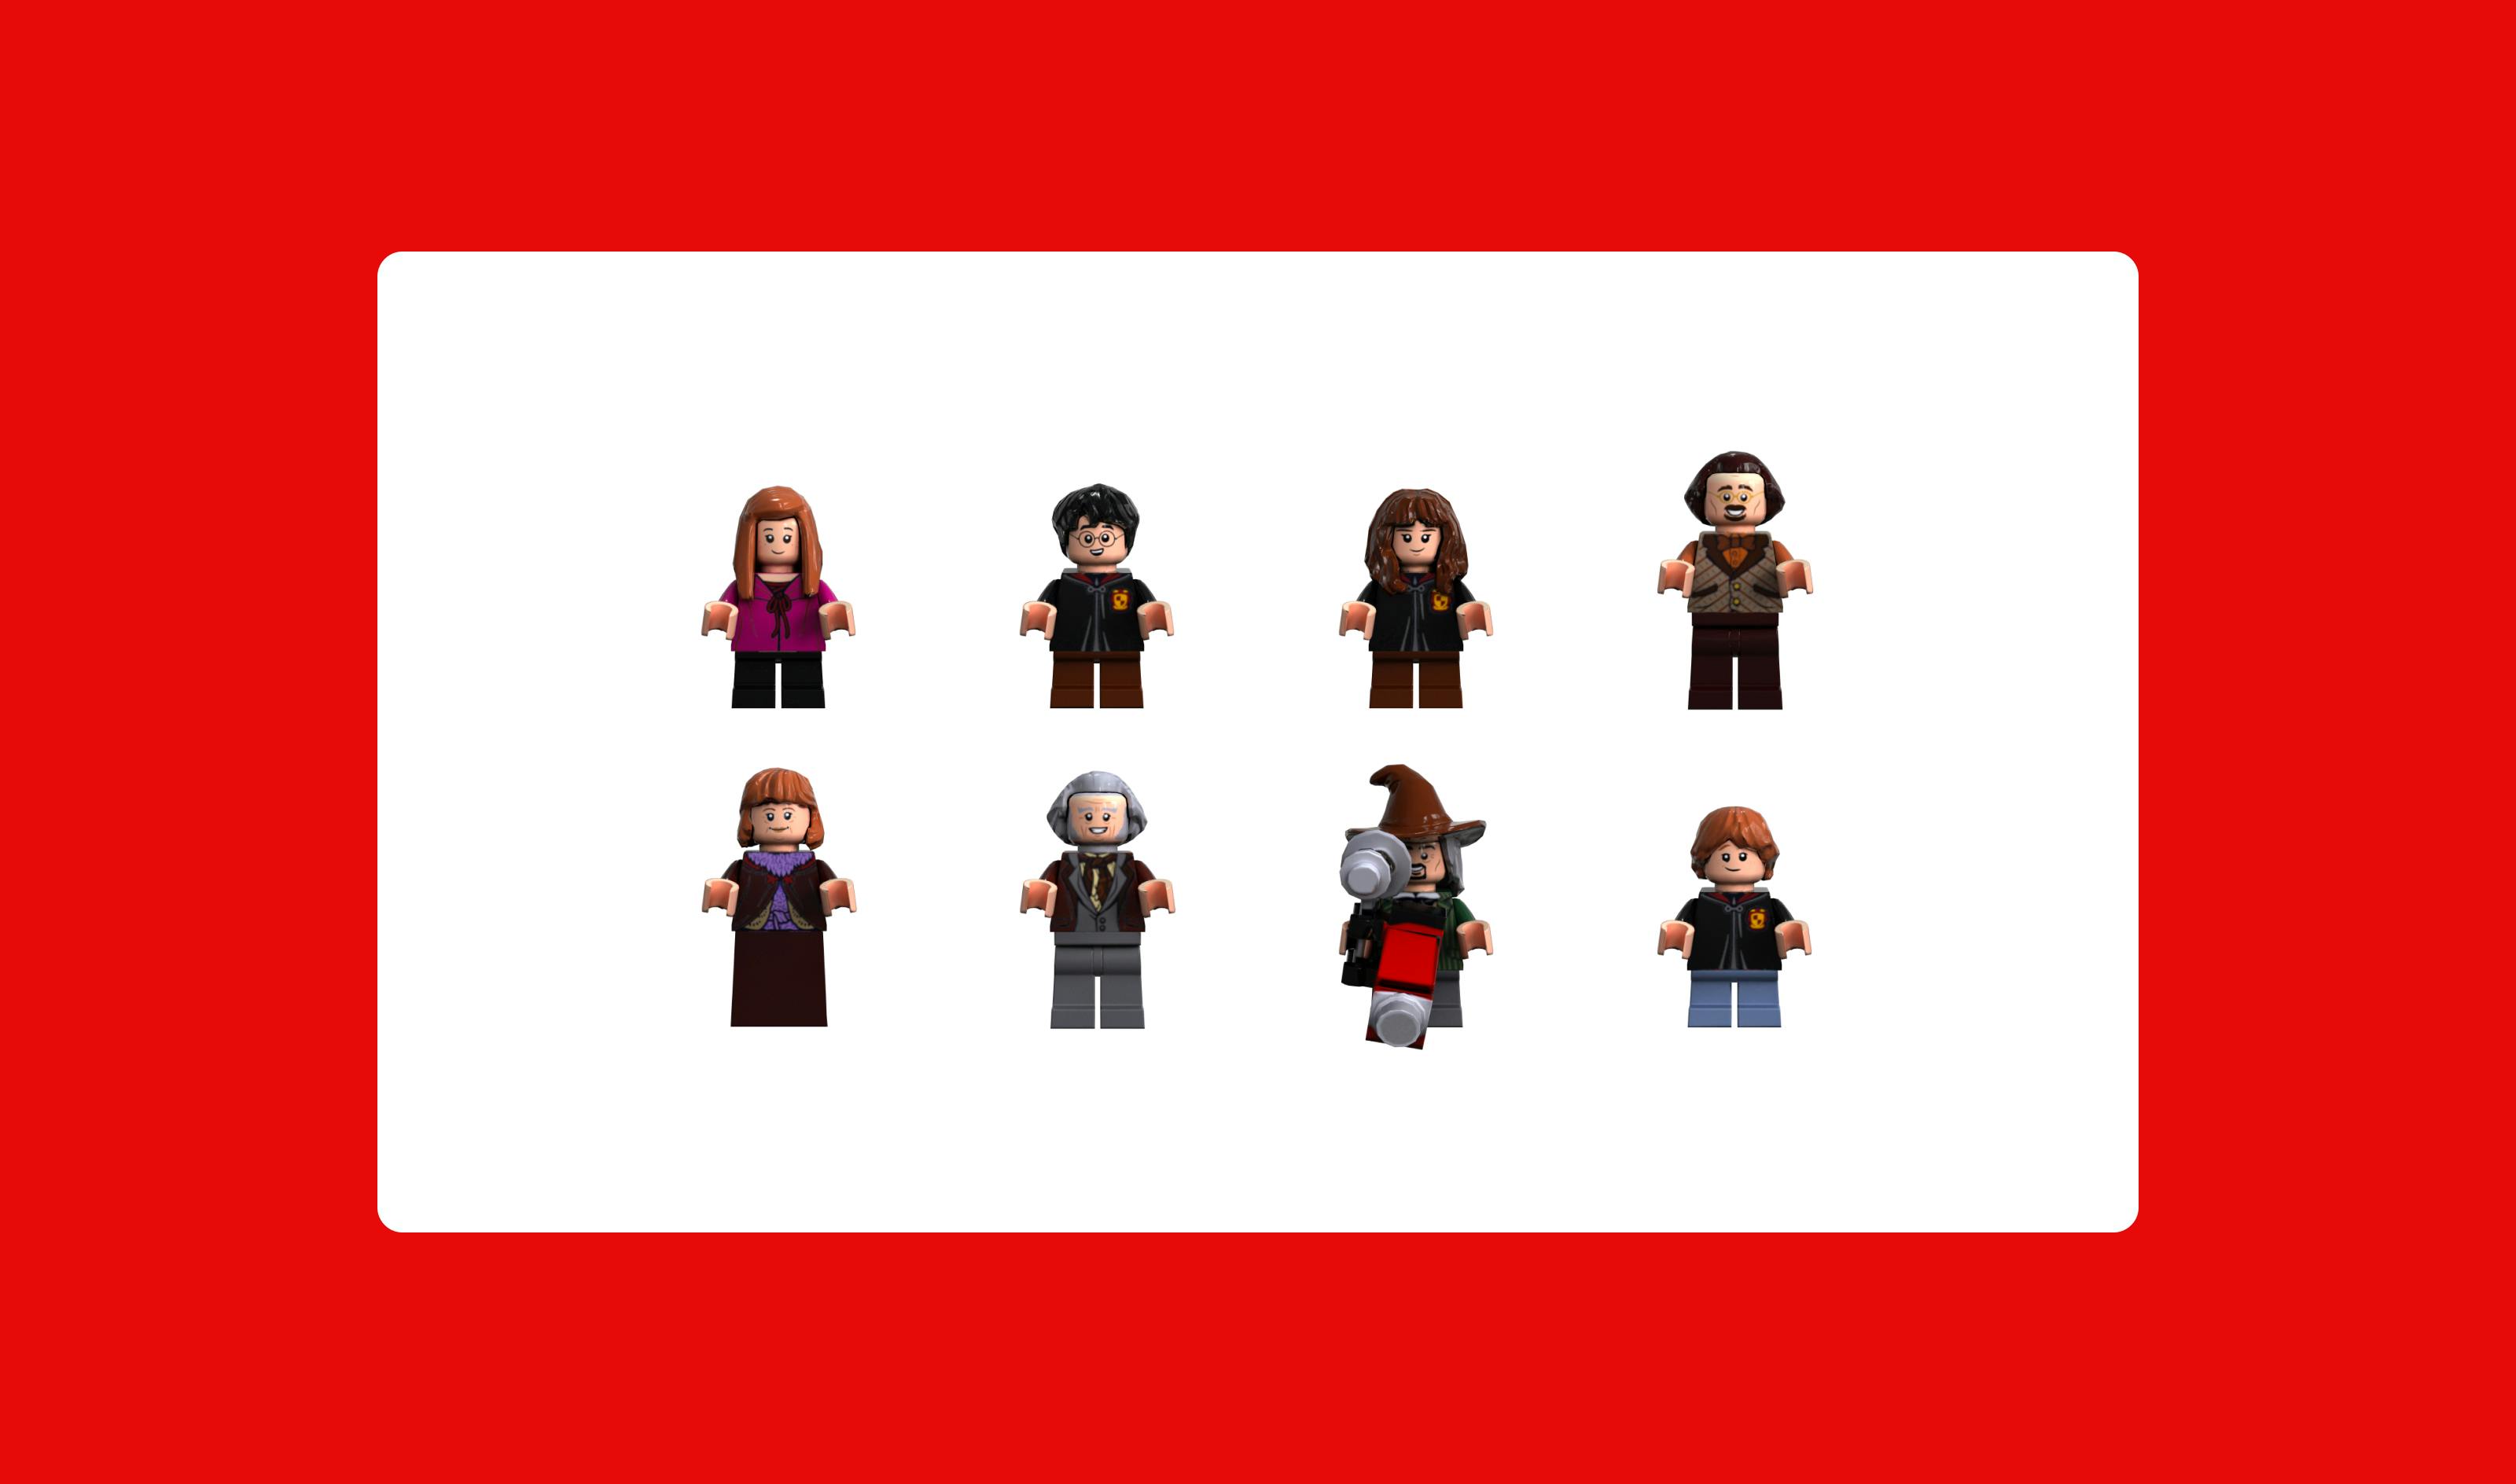 Harry Potter characters in lego (Ginny, Harry, Hermione, the ice merchant, Mrs Weasley, Ollivander, the photographer, Ron)